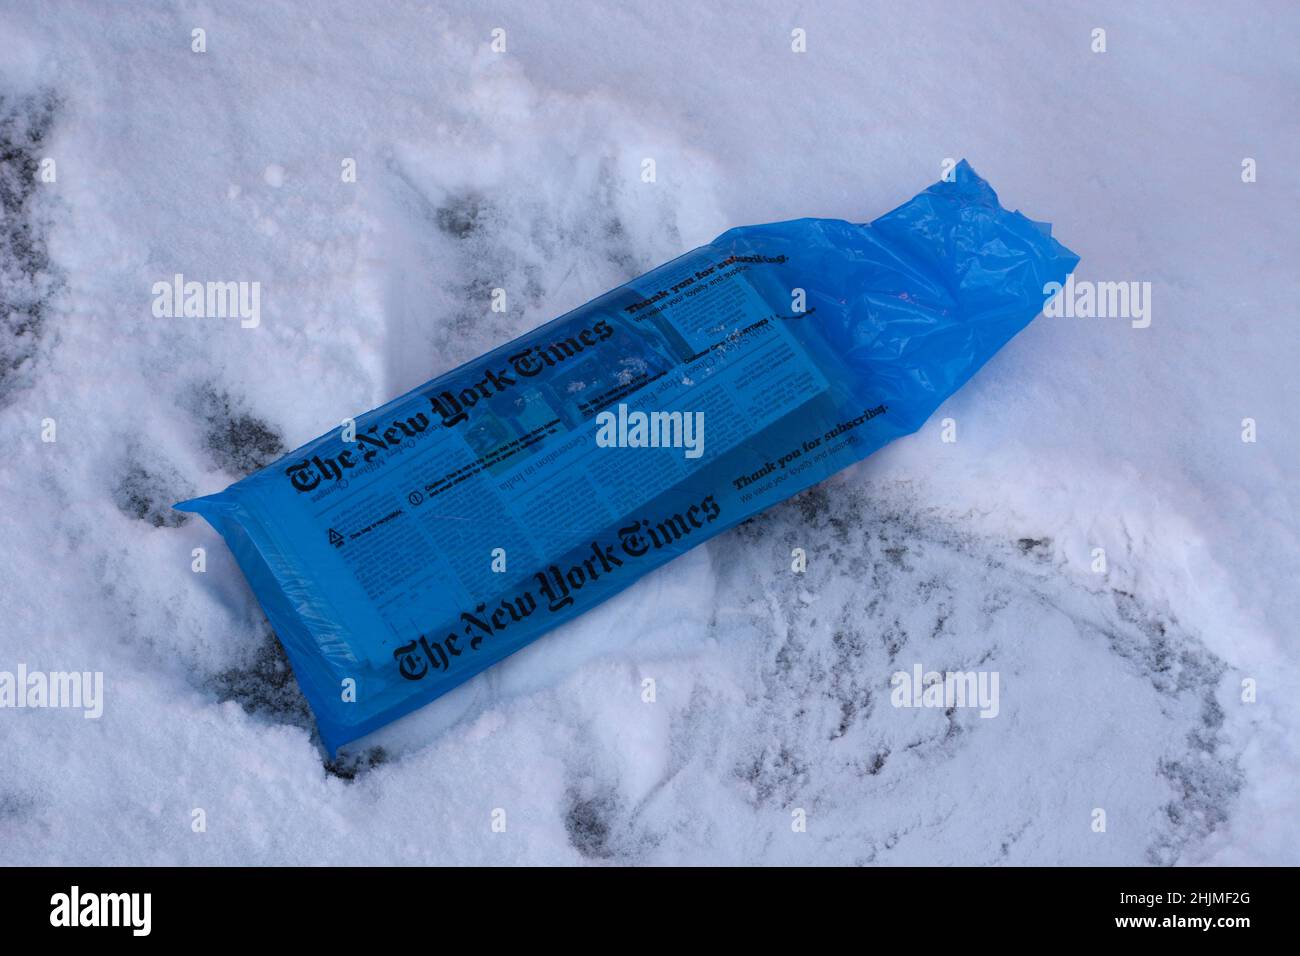 A bagged copy of The New York Times on snow-covered driveway in Santa Fe, New Mexico. Stock Photo